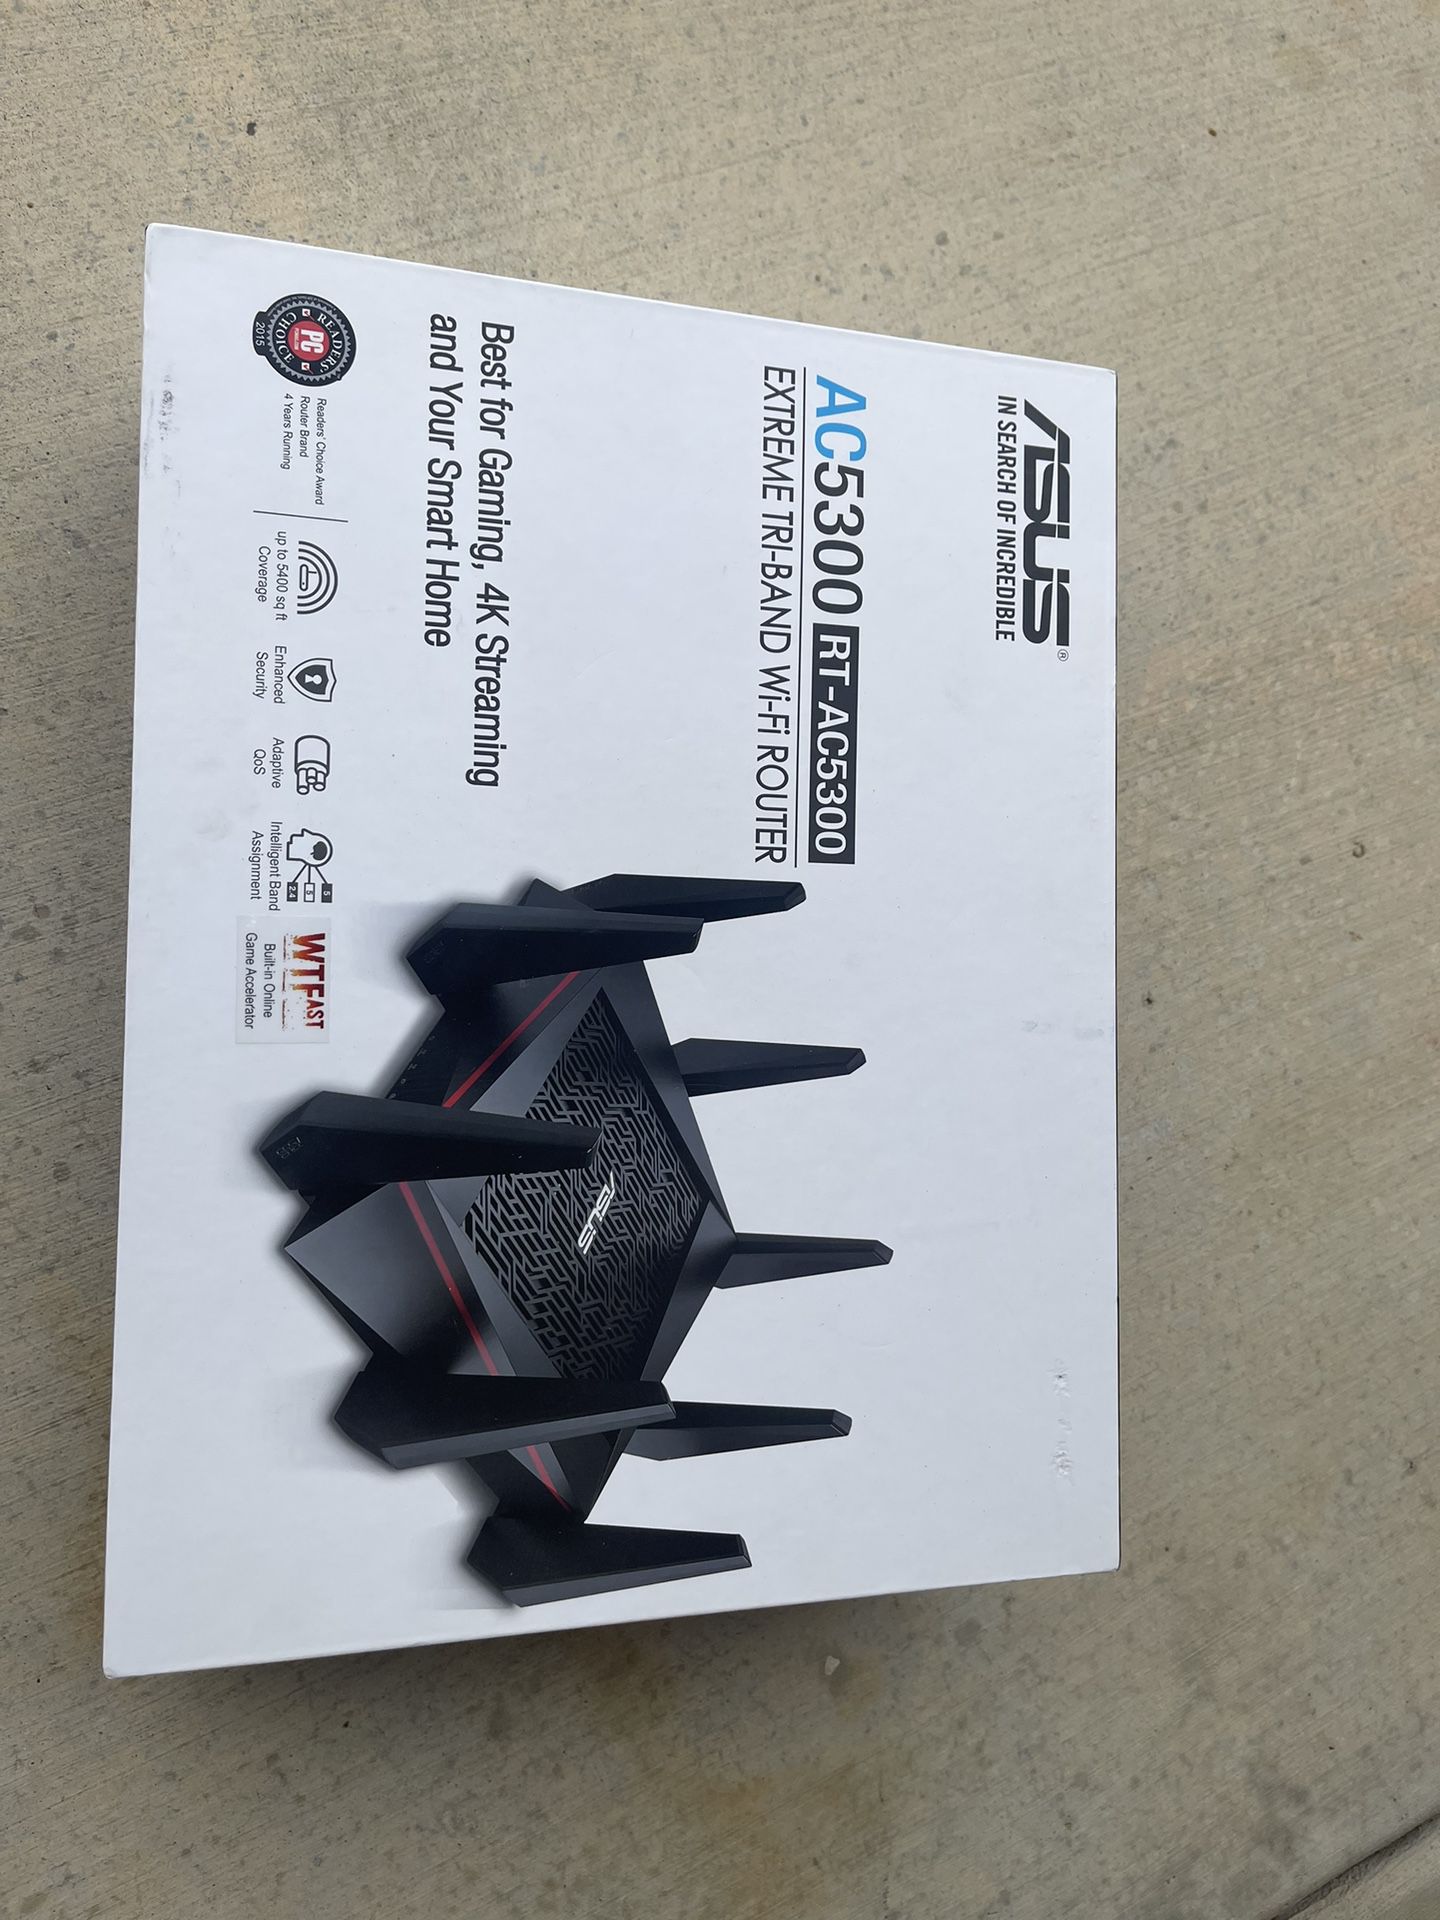 Asus ac 5300 Router